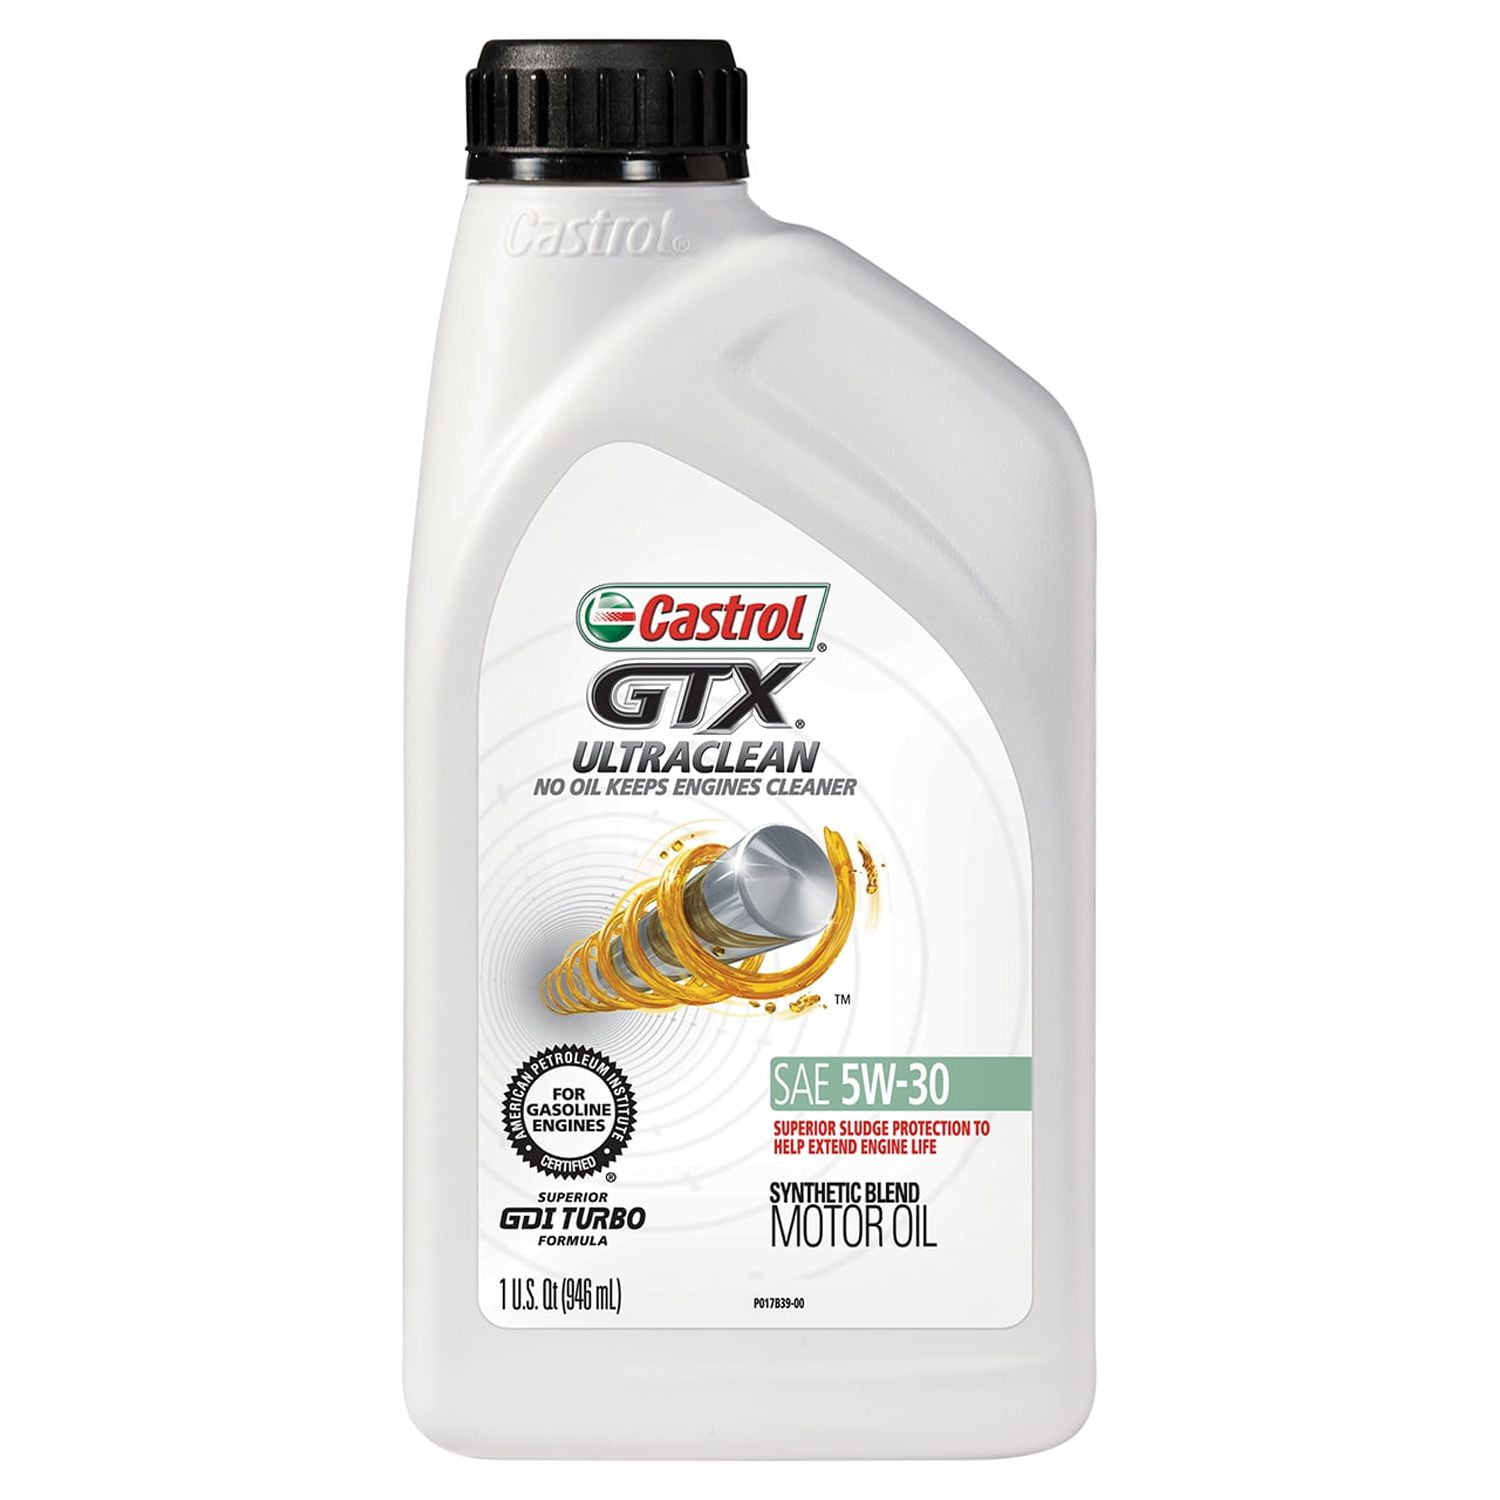 Turbo cleaning, Engine lubricant, Engine cleaner